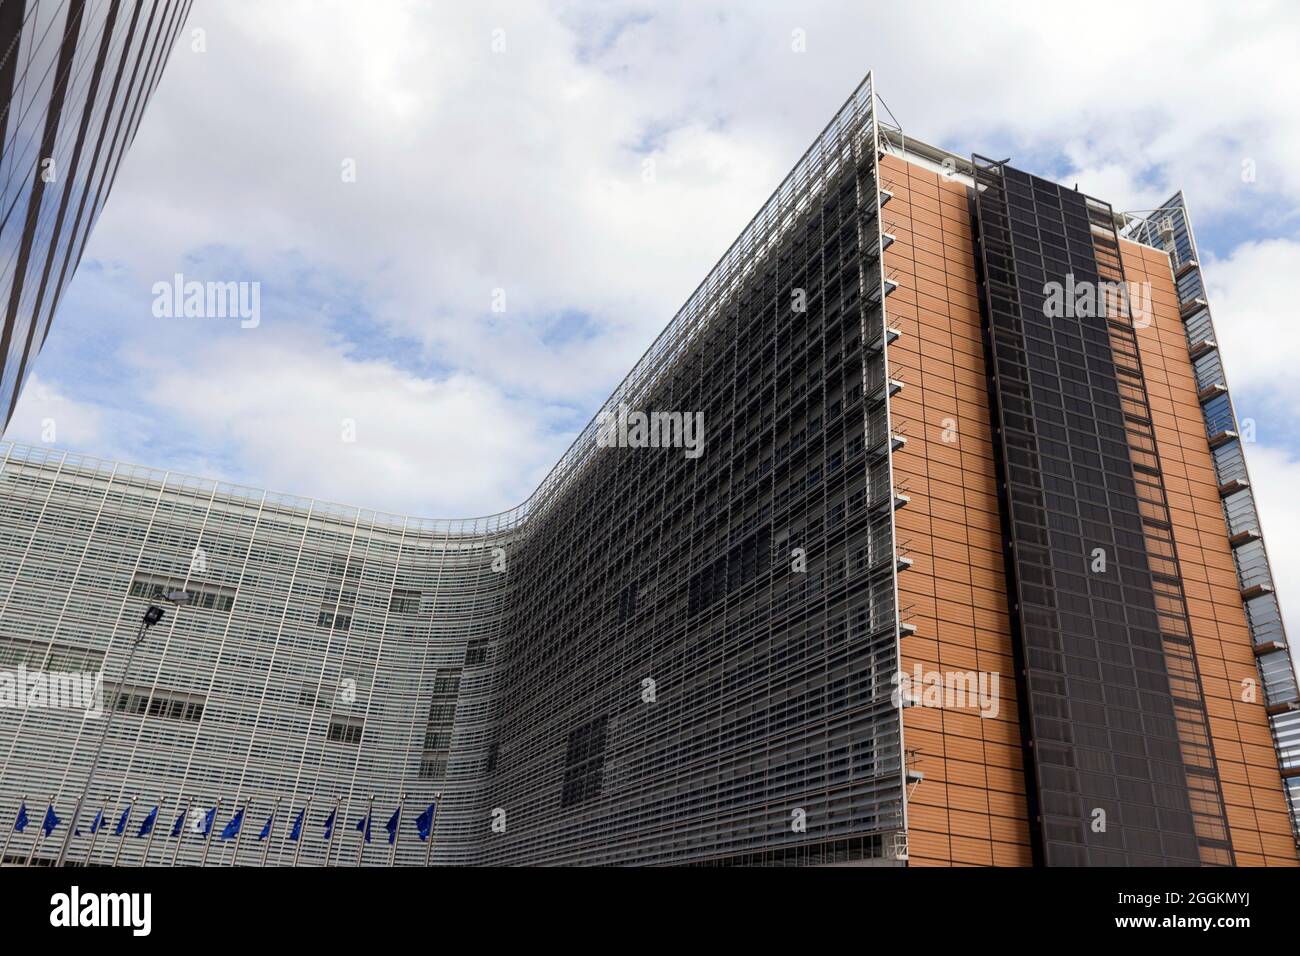 The Berlaymont Building, seat of the European Commission in Brussels, Belgium Stock Photo